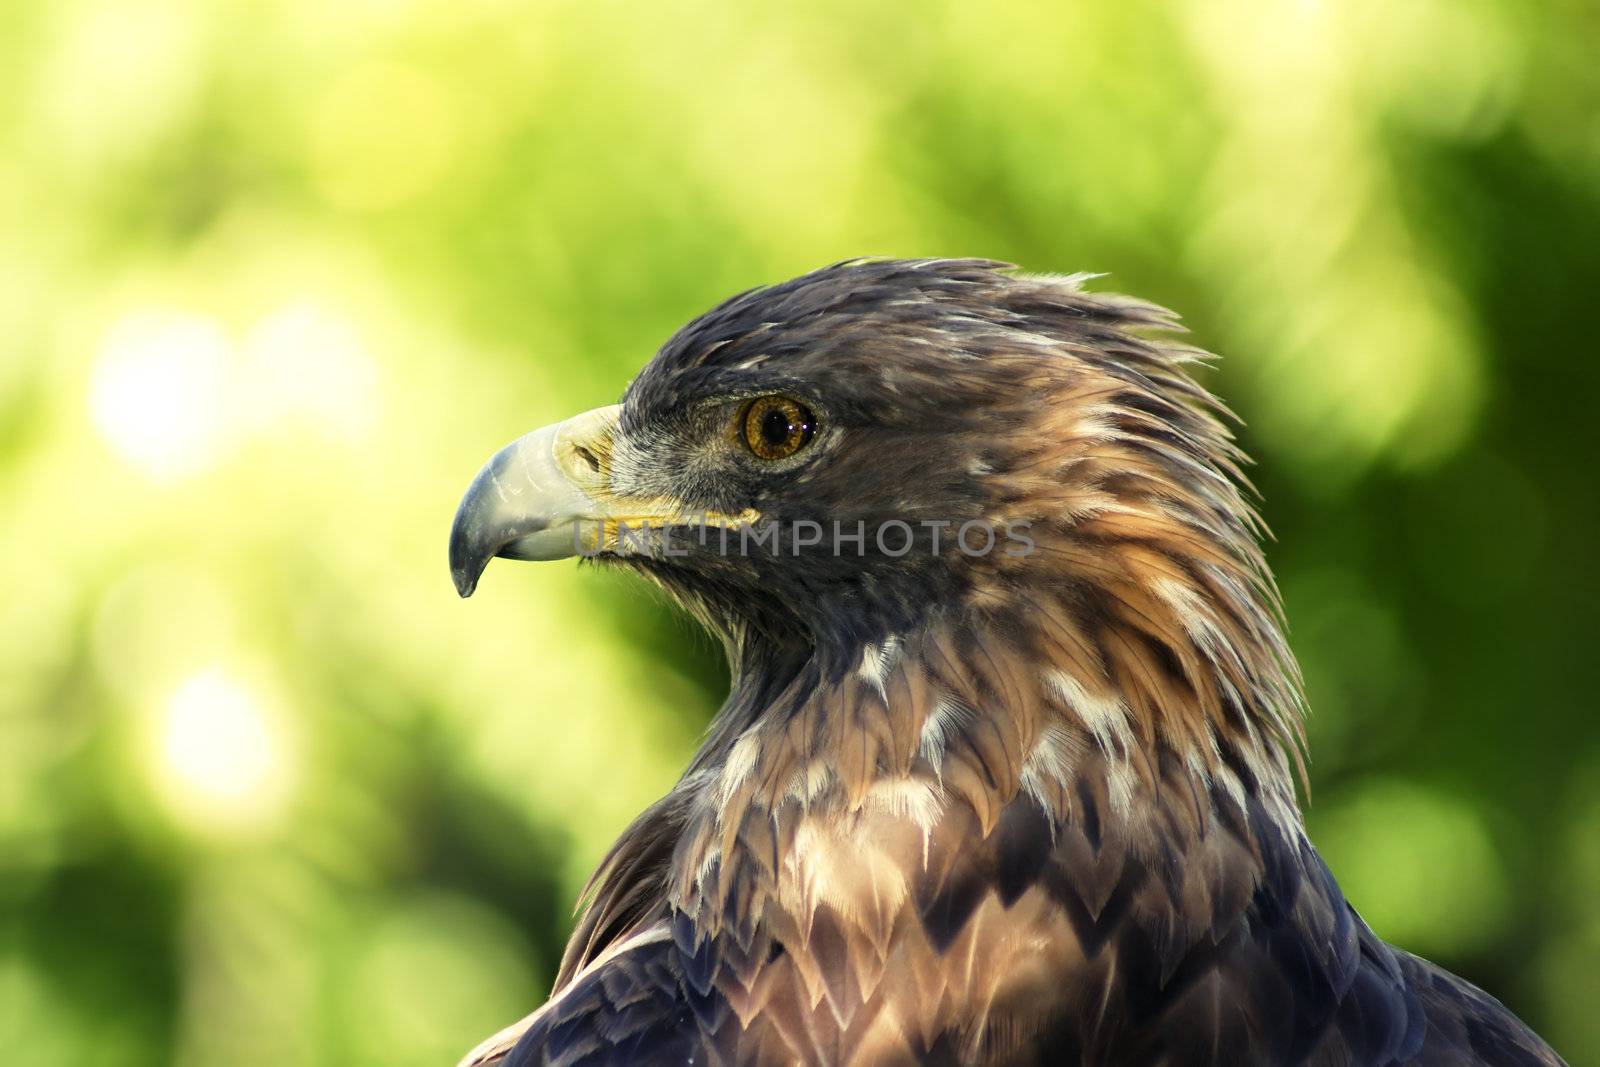 Close-up portrait of a magnificient golden eagle resting in the shade contrasted by off focus green foliage